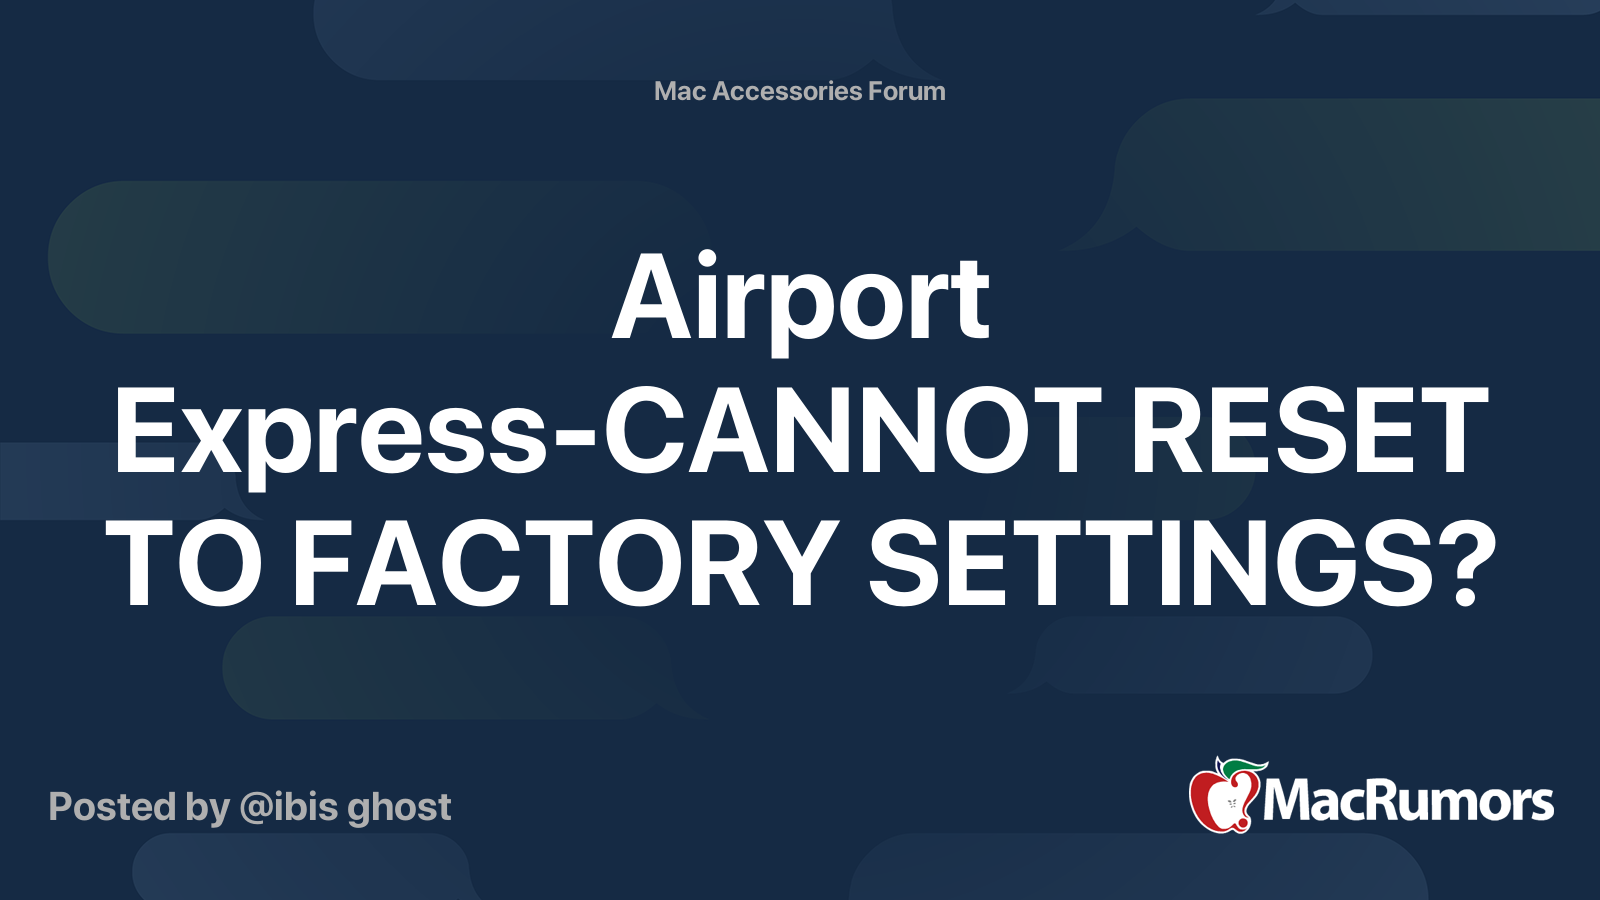 Airport Express-CANNOT RESET TO FACTORY SETTINGS? | MacRumors Forums